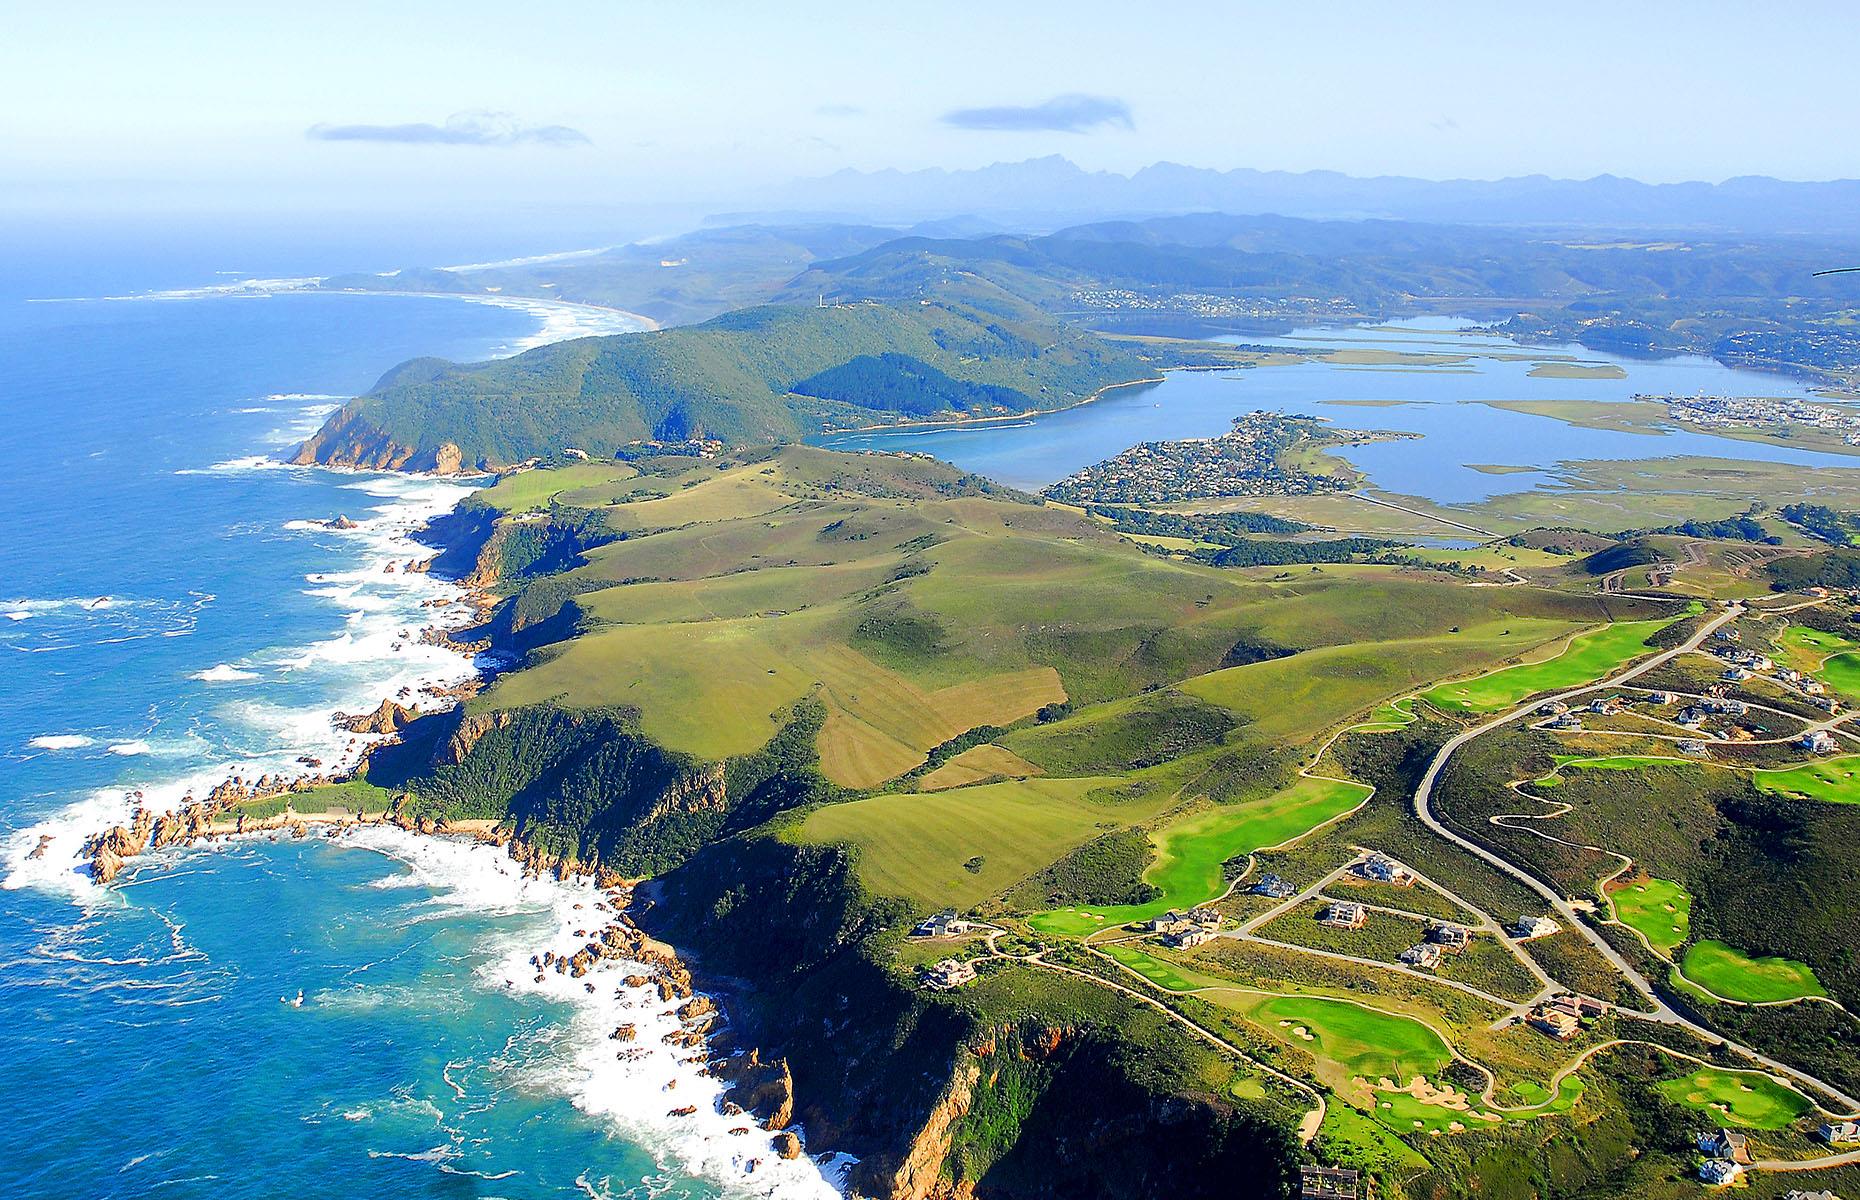 <p>From glorious beaches to lush green hills, the <a href="https://www.loveexploring.com/guides/65670/the-garden-route-south-africa">Garden Route</a> traces South Africa’s south-eastern coast. Flanked between the Indian Ocean and verdant mountains, the 125-mile (200km) journey extends from Mossel Bay in the Western Cape to Storms River in the Eastern Cape, taking in Knysna, Plettenberg Bay and Tsitsikamma National Park.</p>